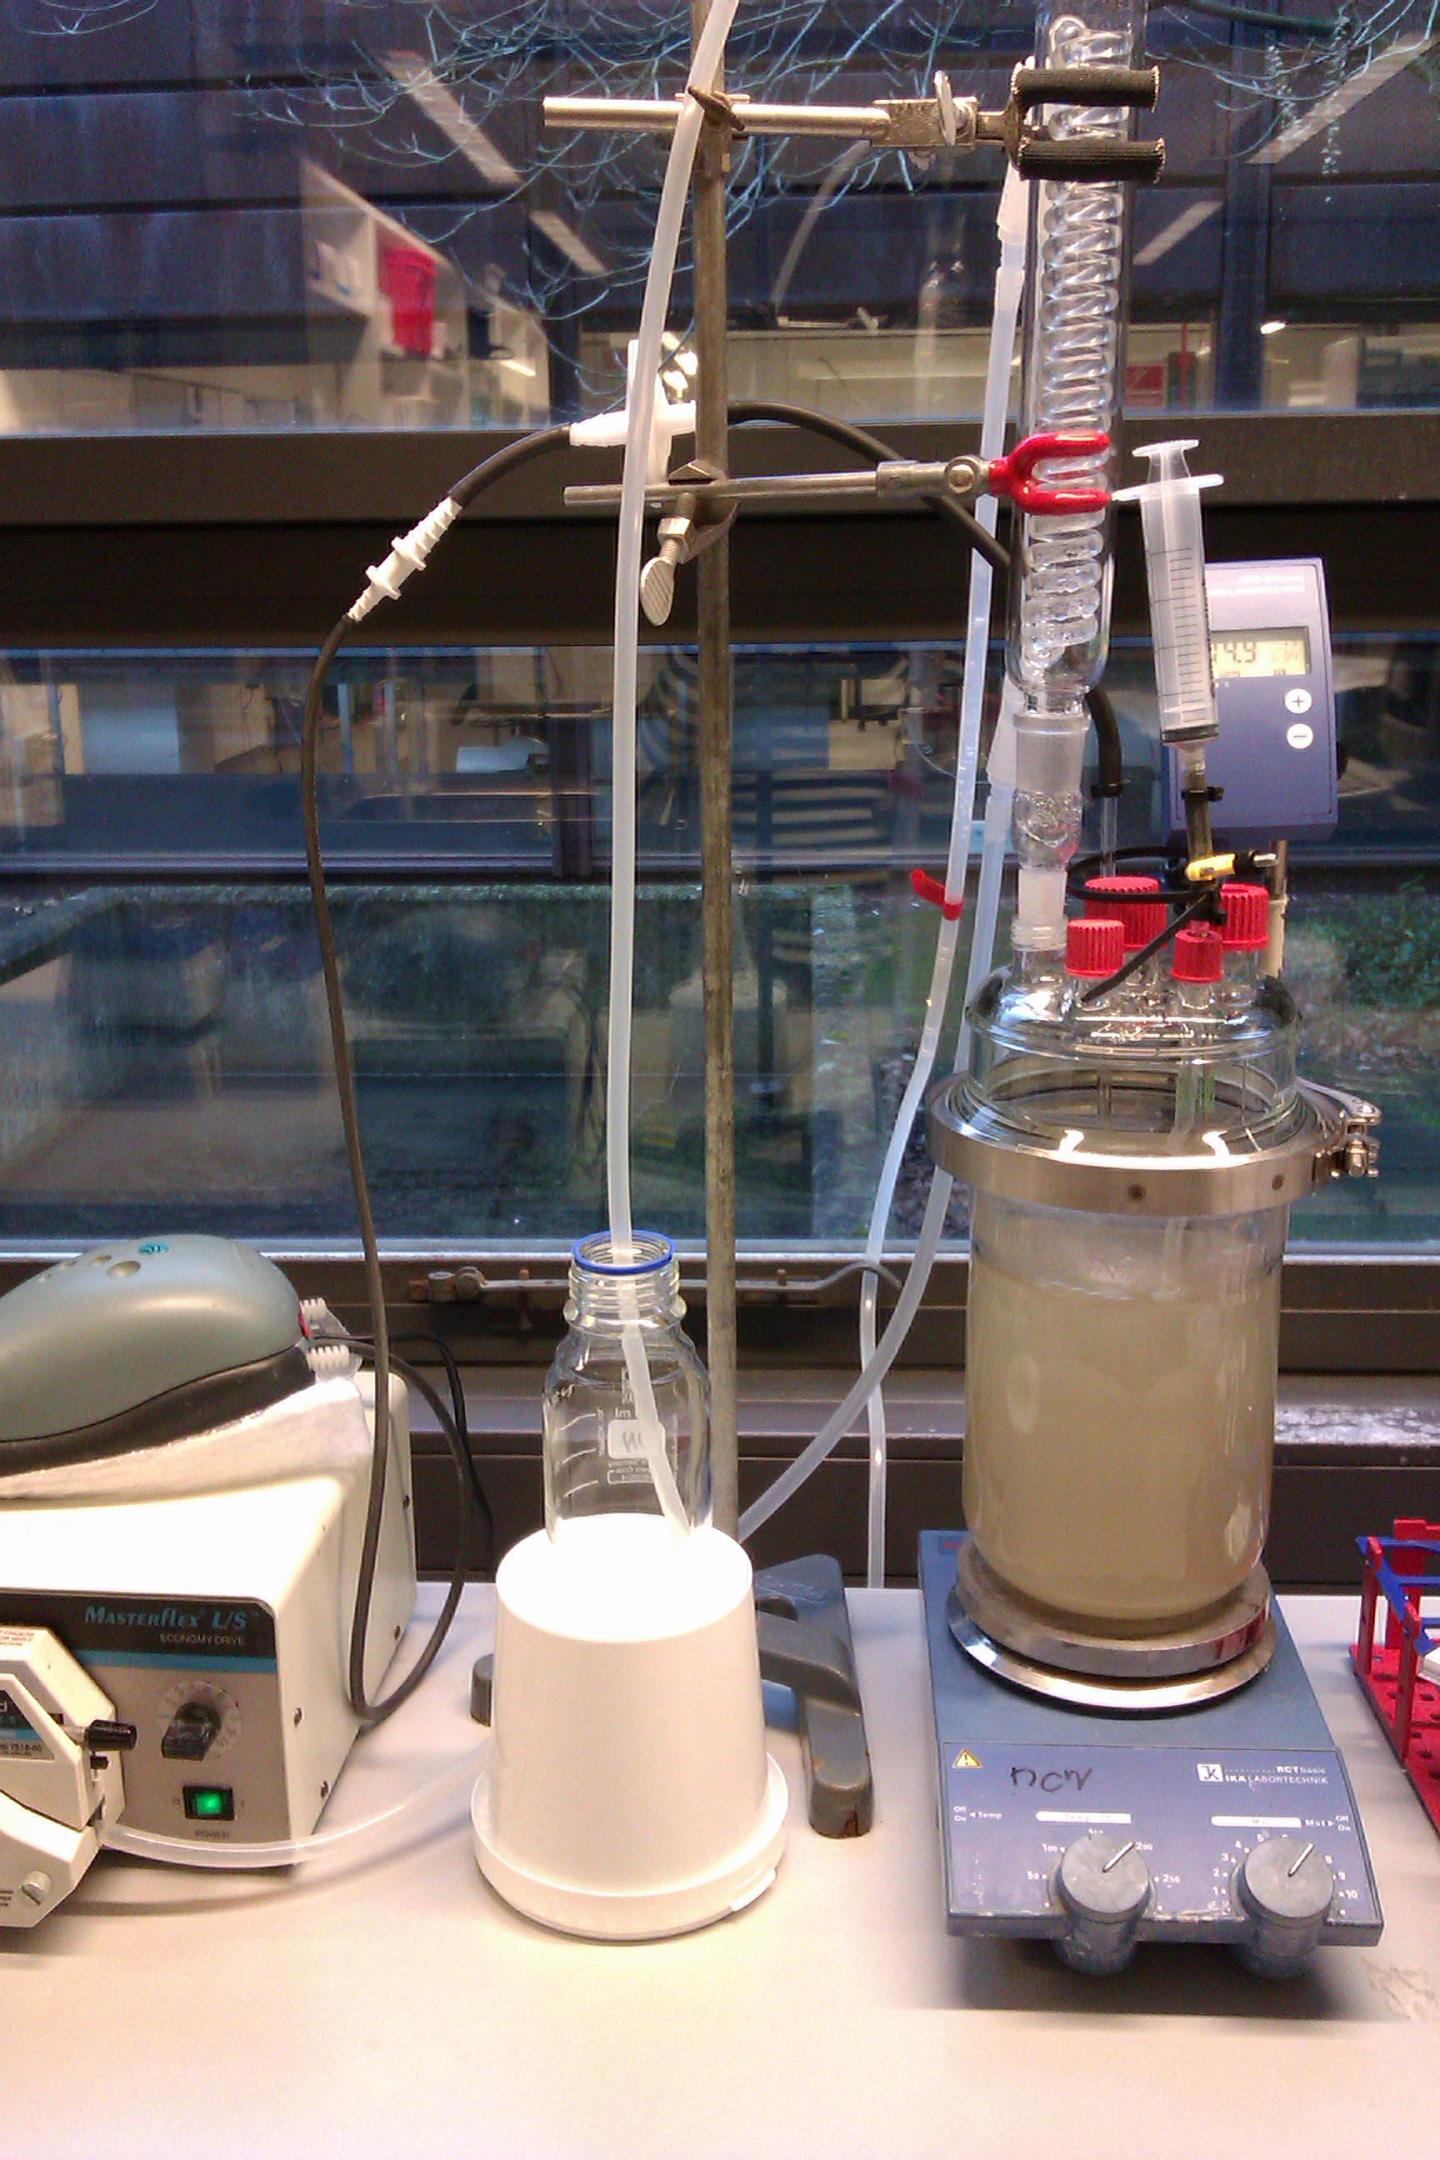 S. Islandicus In The Lab Of University of Southern Denmark